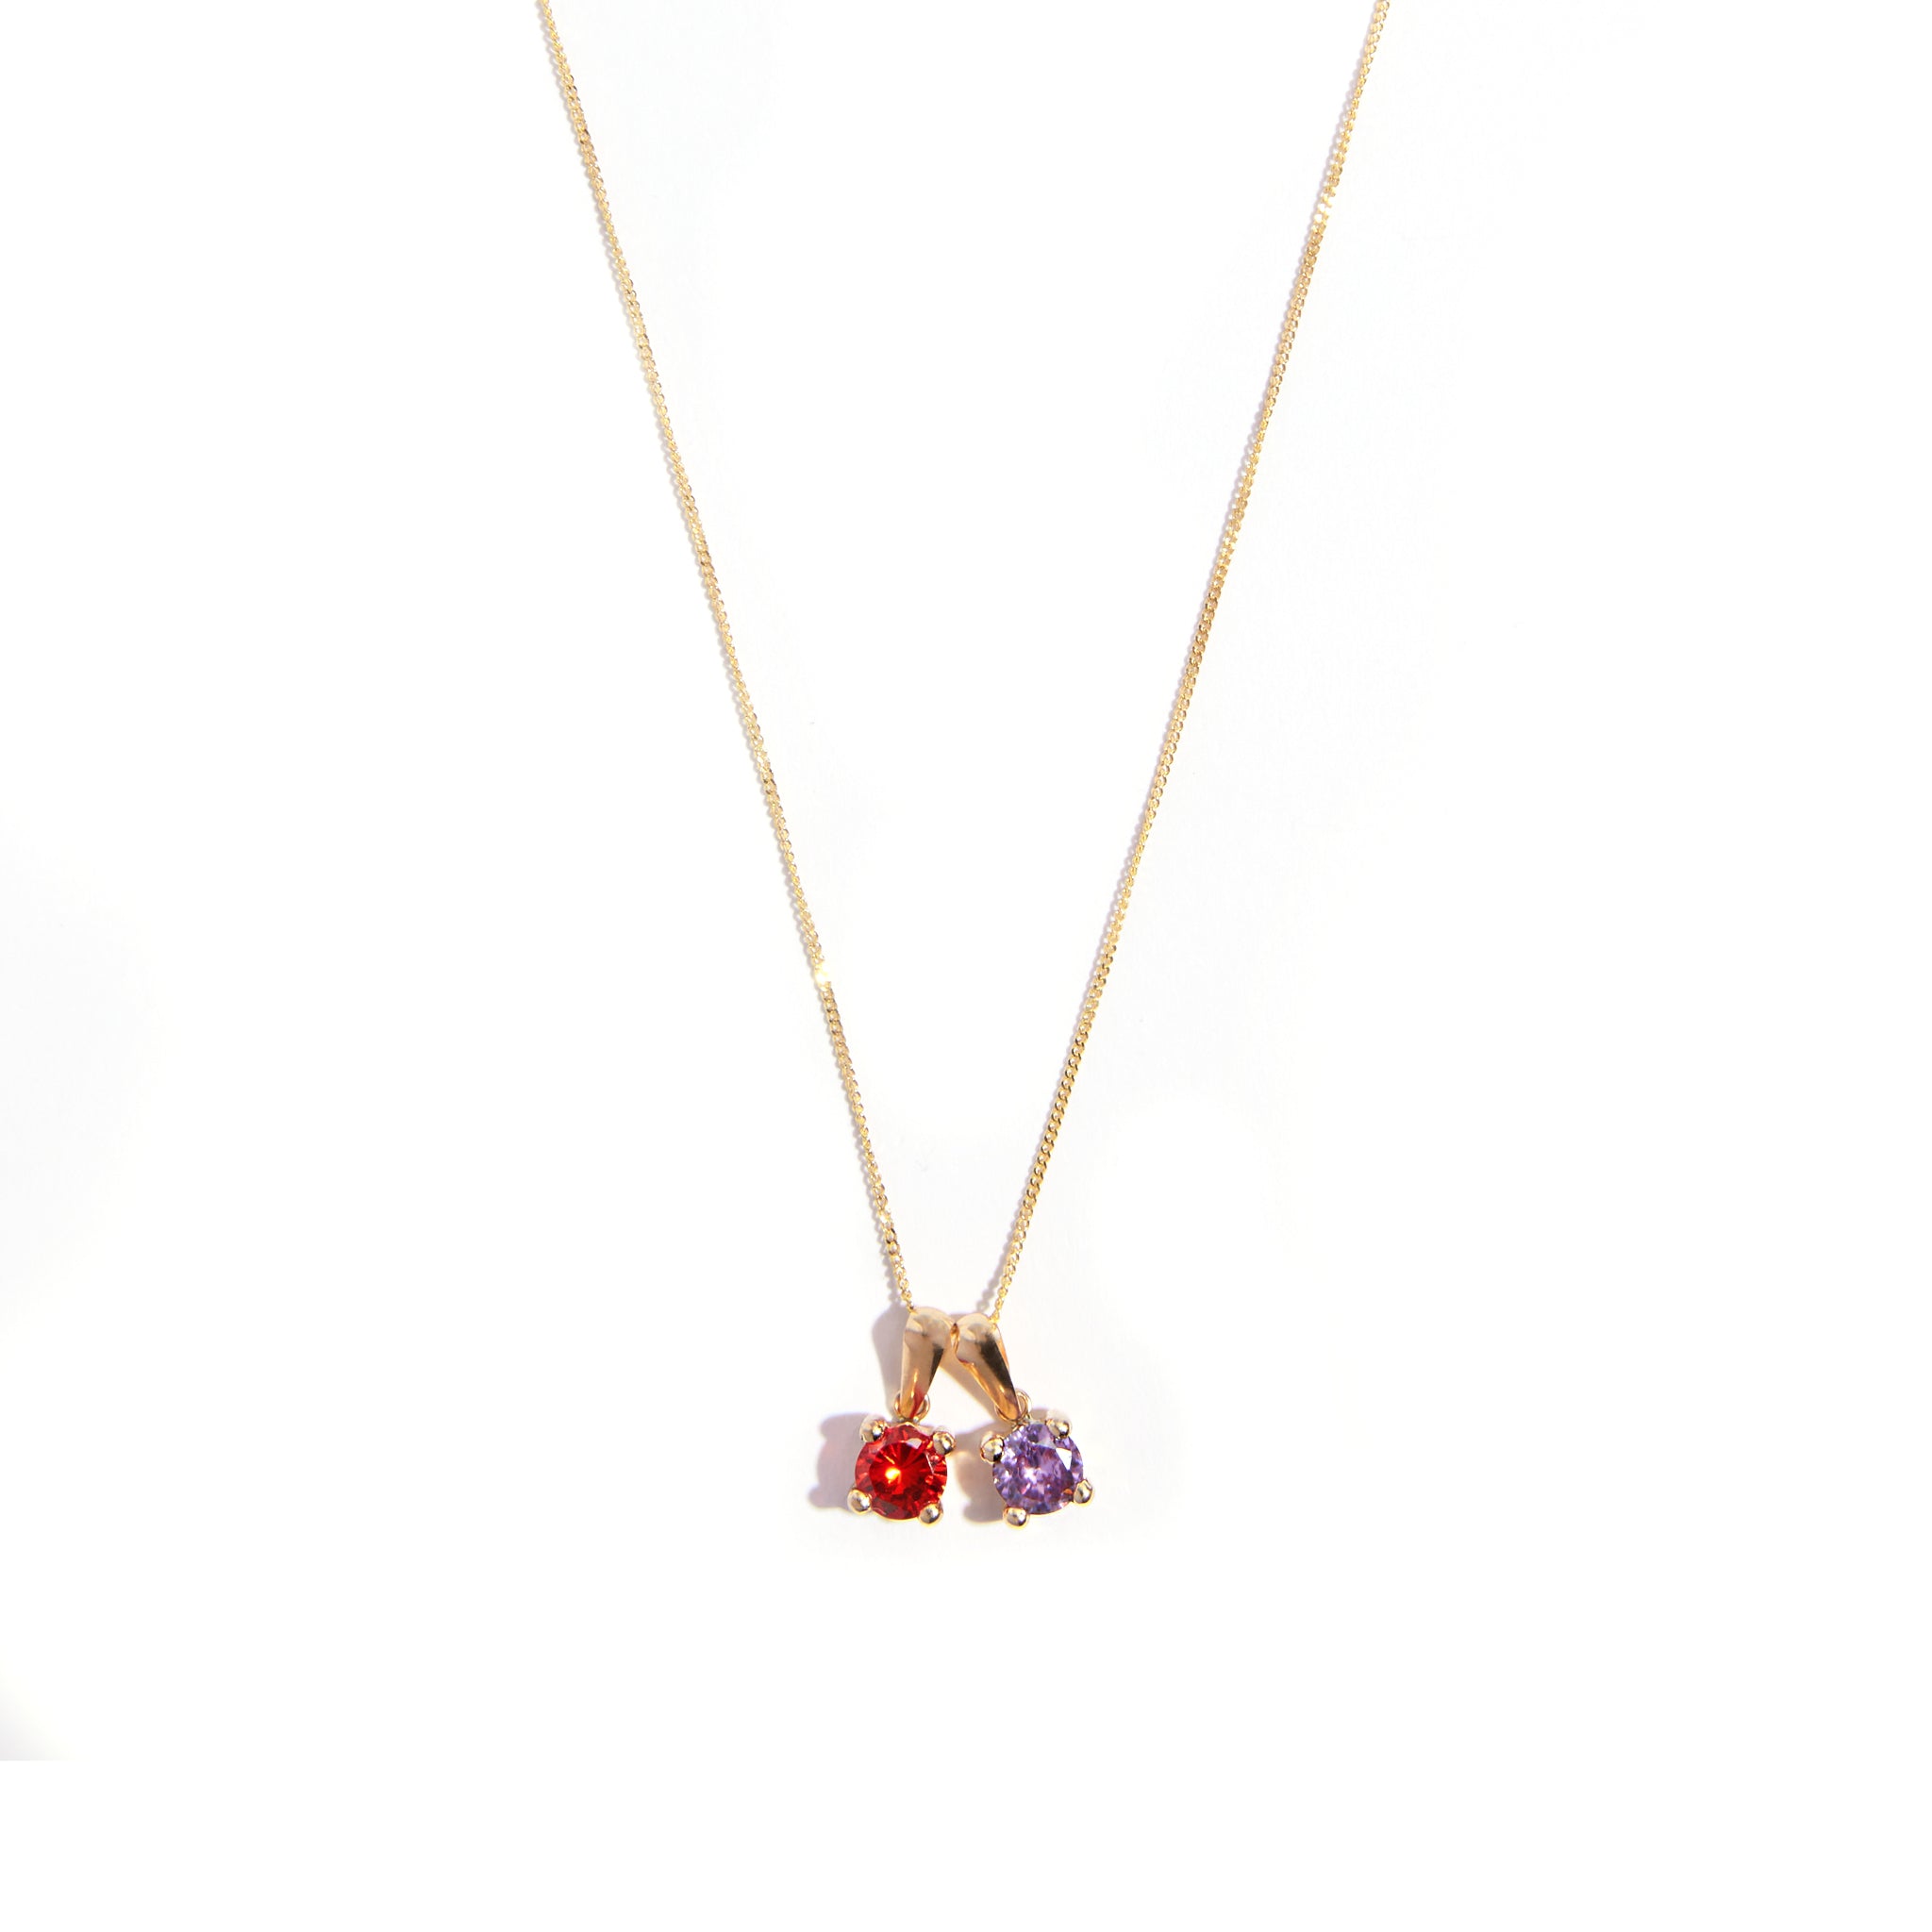 Elevate your style with the 9 carat yellow gold eternal unity necklace, personalized with birthstones. This stunning accessory symbolizes everlasting bonds, adorned with sparkling birthstones for a touch of individuality and sentimentality. A timeless piece to cherish and celebrate special connections.